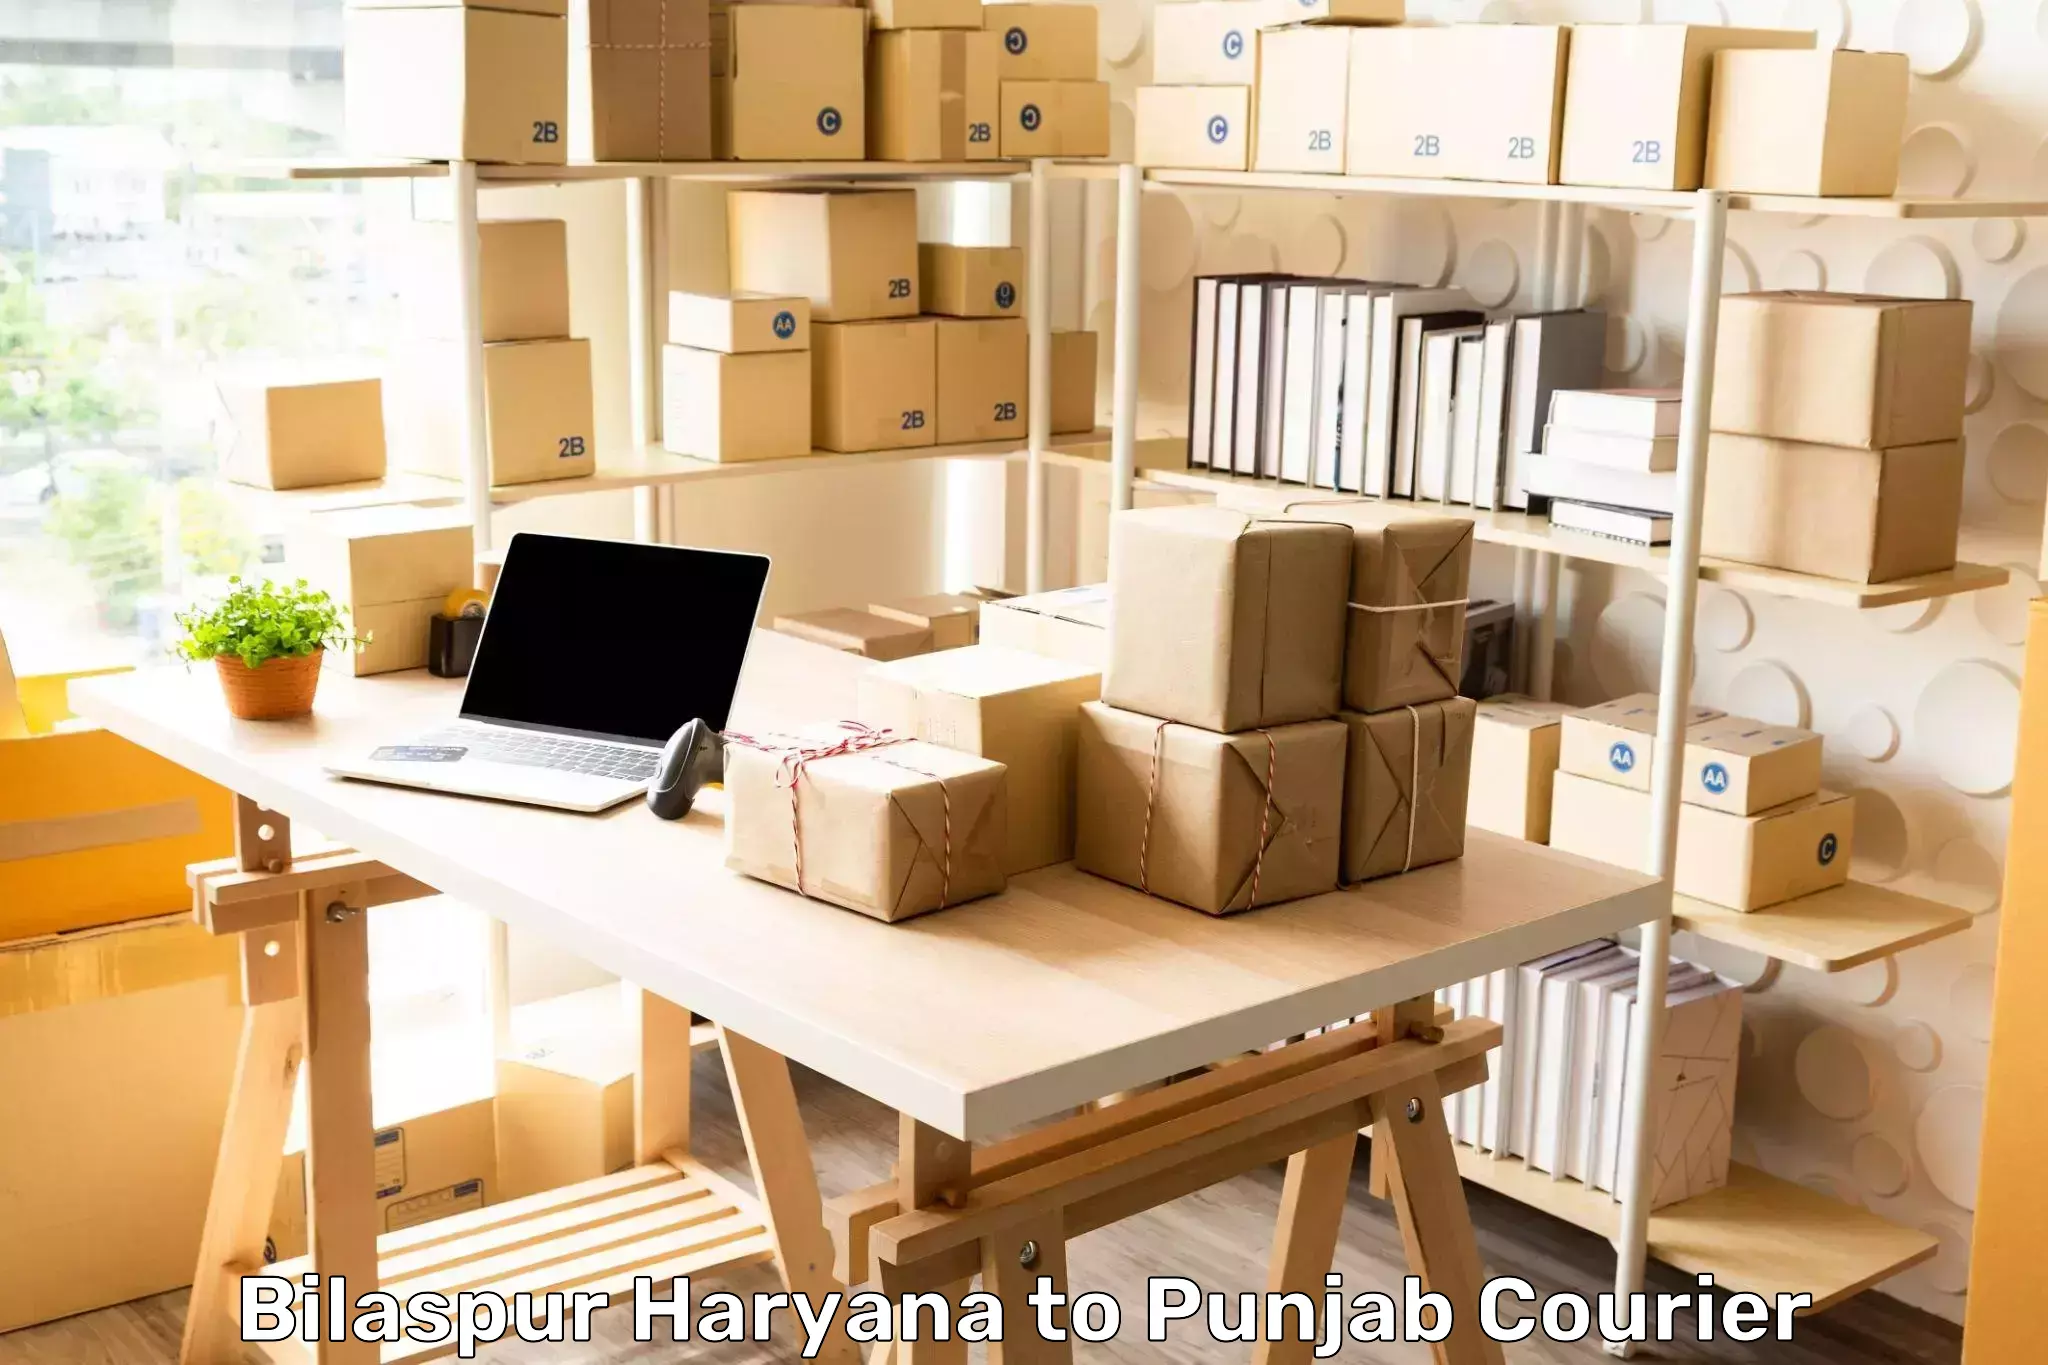 24-hour courier service in Bilaspur Haryana to Begowal